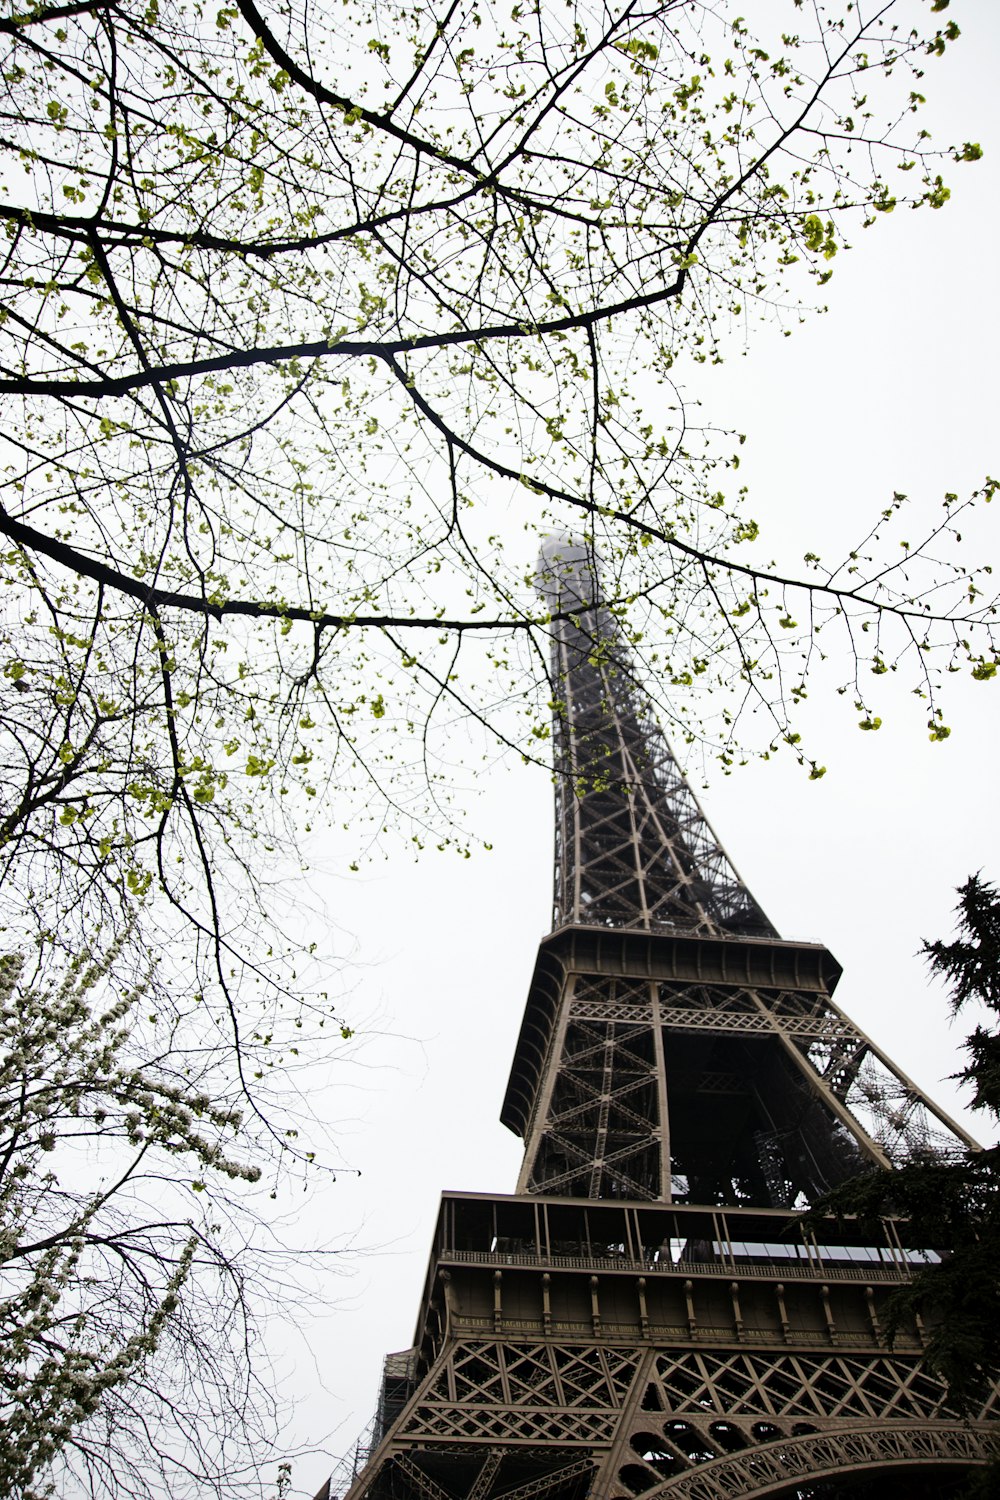 a view of the eiffel tower from below